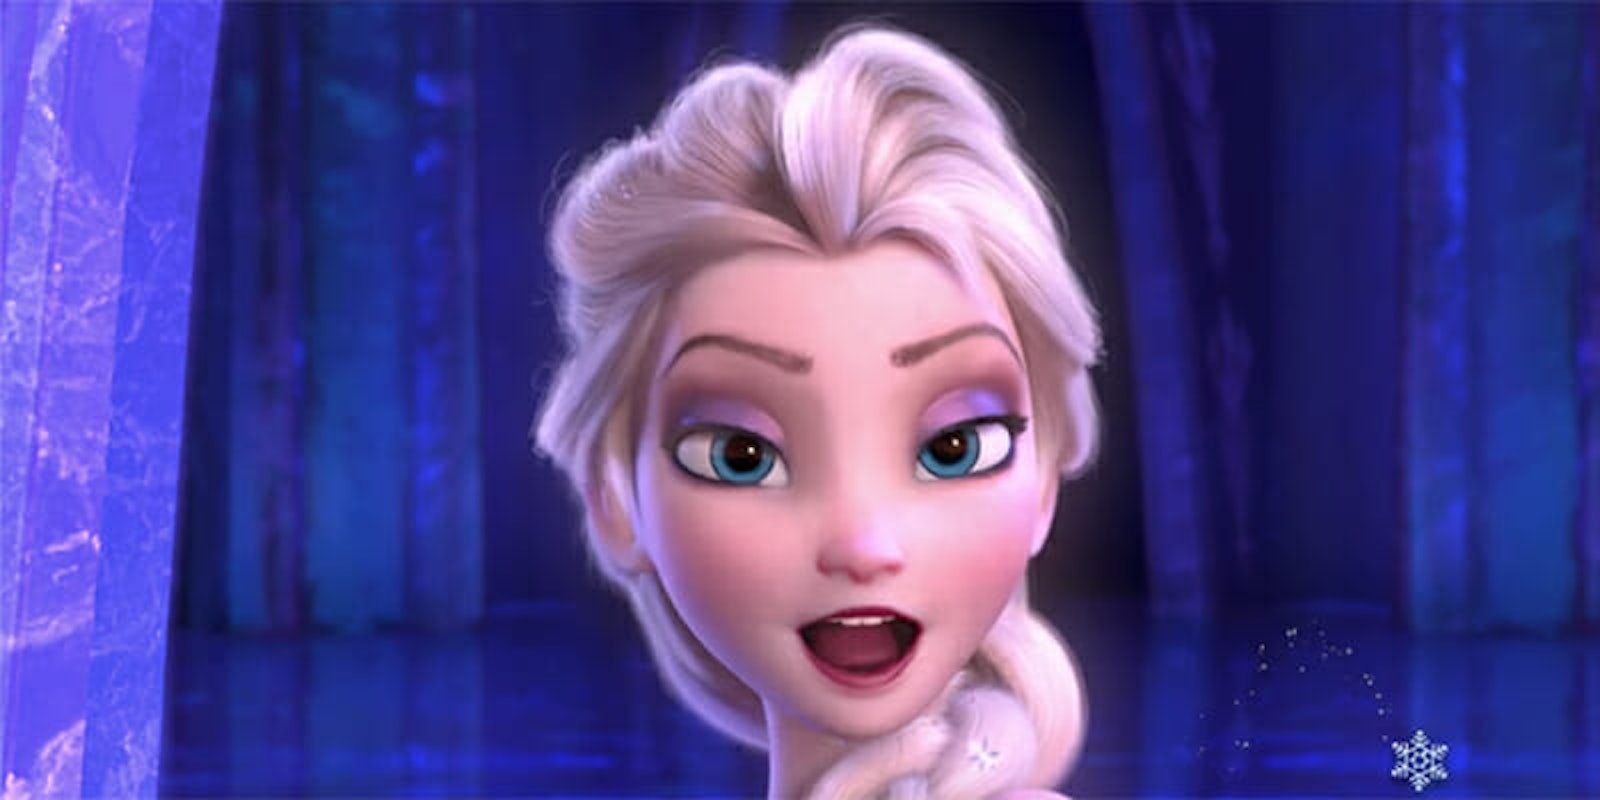 Writer and director Jennifer Lee's statement gave Disney fans hope that Elsa will be a lesbian in the sequel.